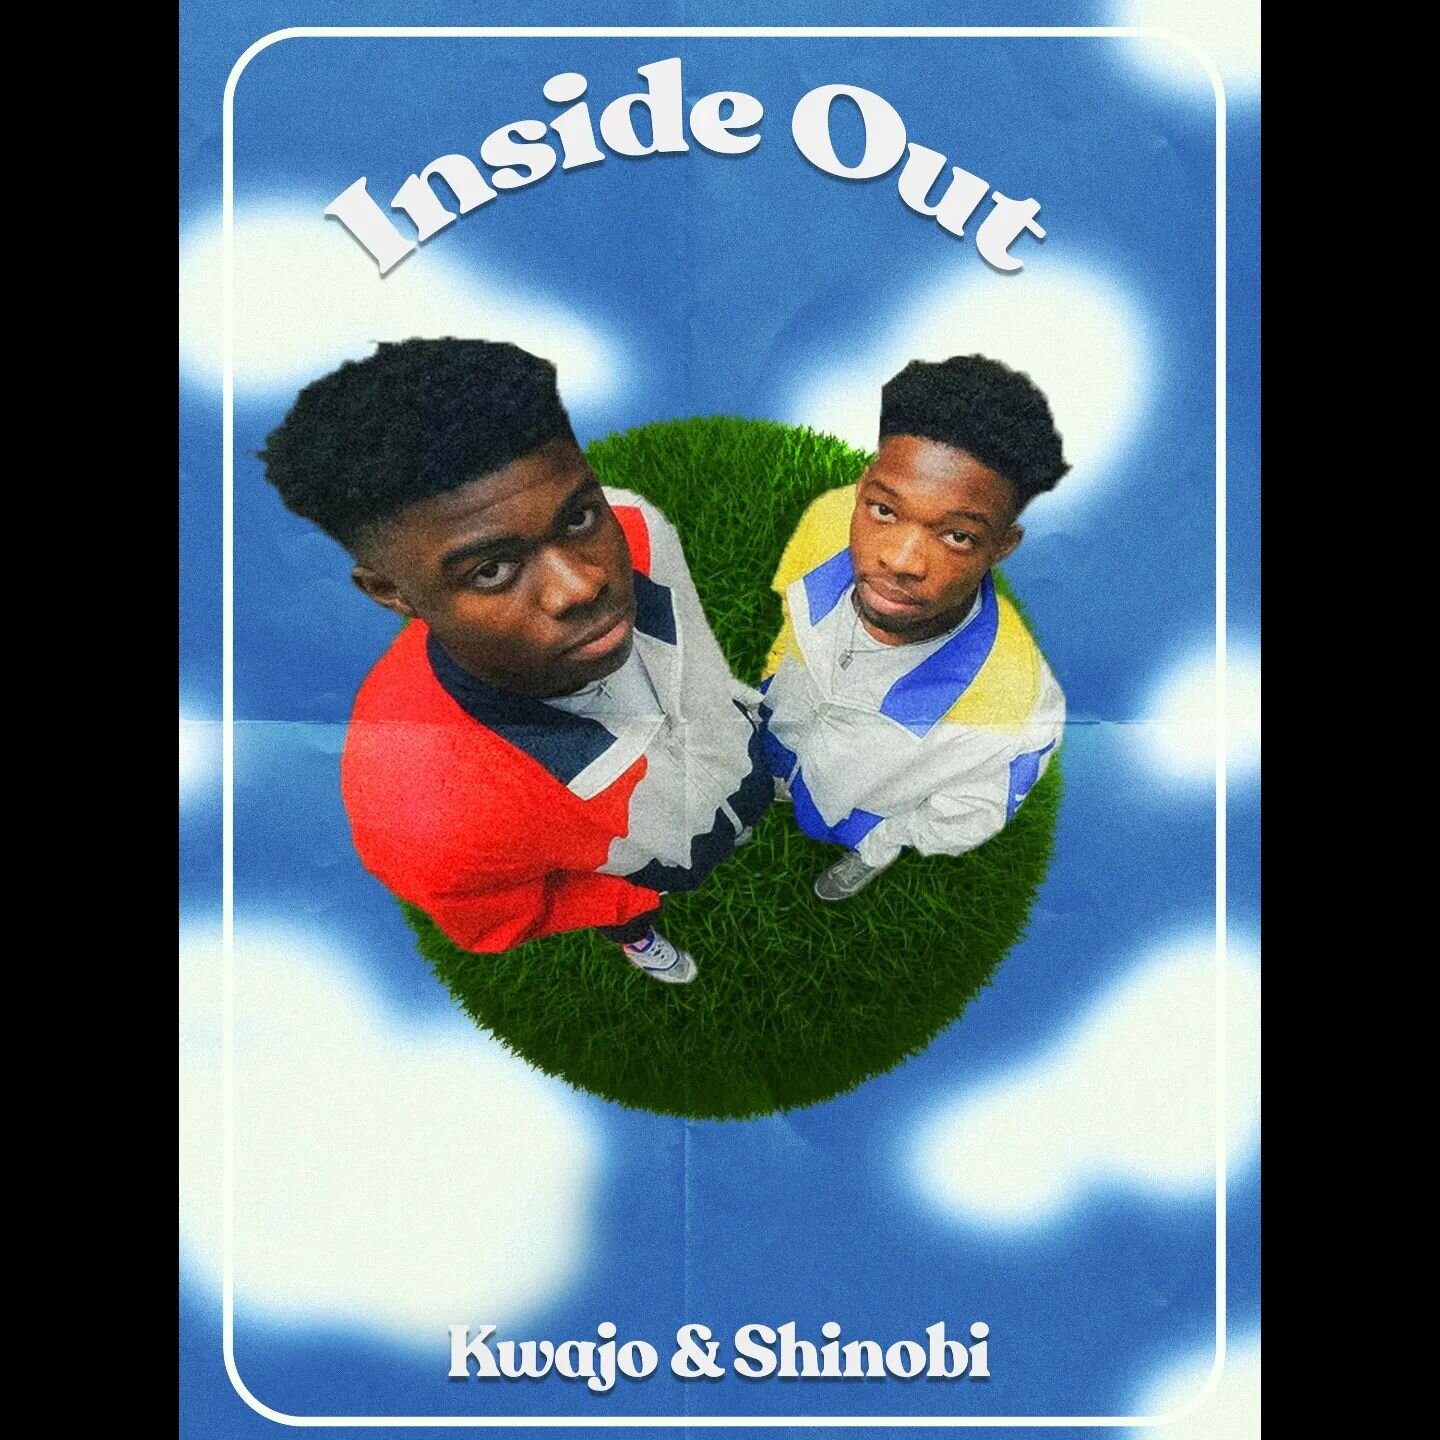 You know I had to get my boys right, I made this a while ago but I feel like it's the perfect time to post this since it's been a year since Inside Out came out. Here's to many more bangers 🔥

@kwajooo
@sh1nob101 

#art #artist #artistsoninstagram #